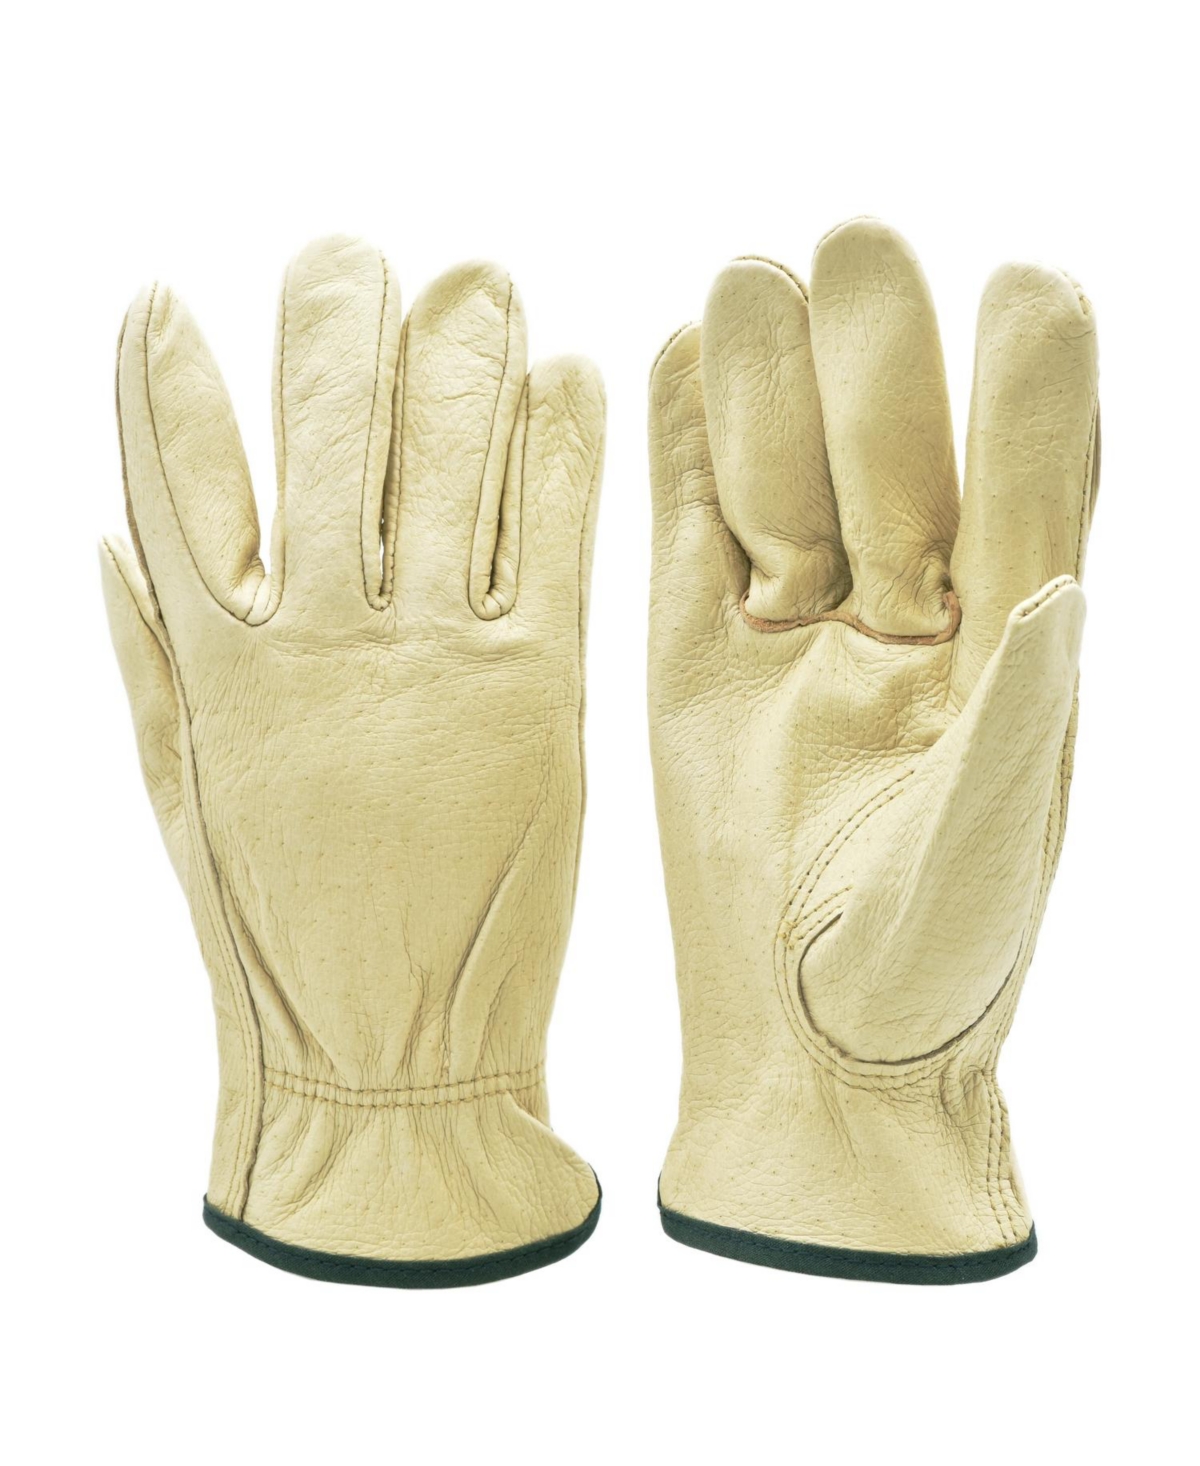 2002 Driving and Work Gloves, 3 Pairs - Natural